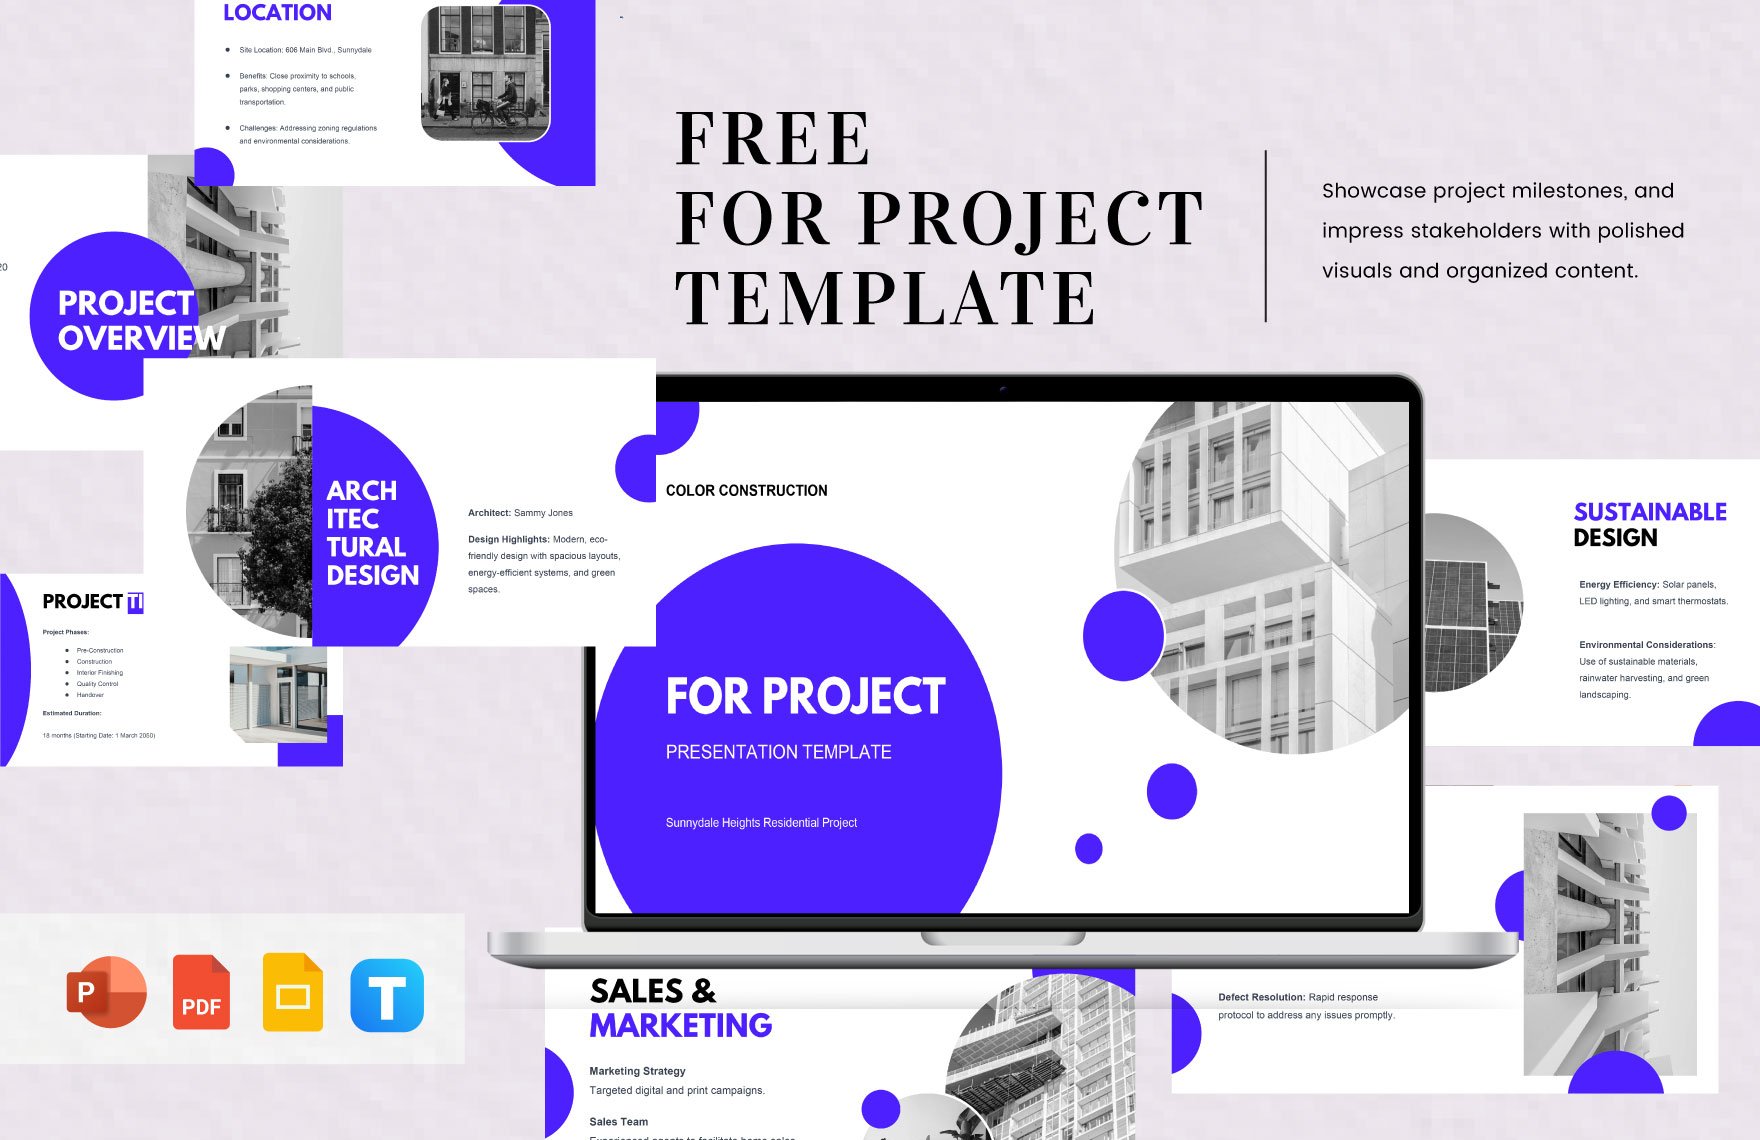 Free For Project Template